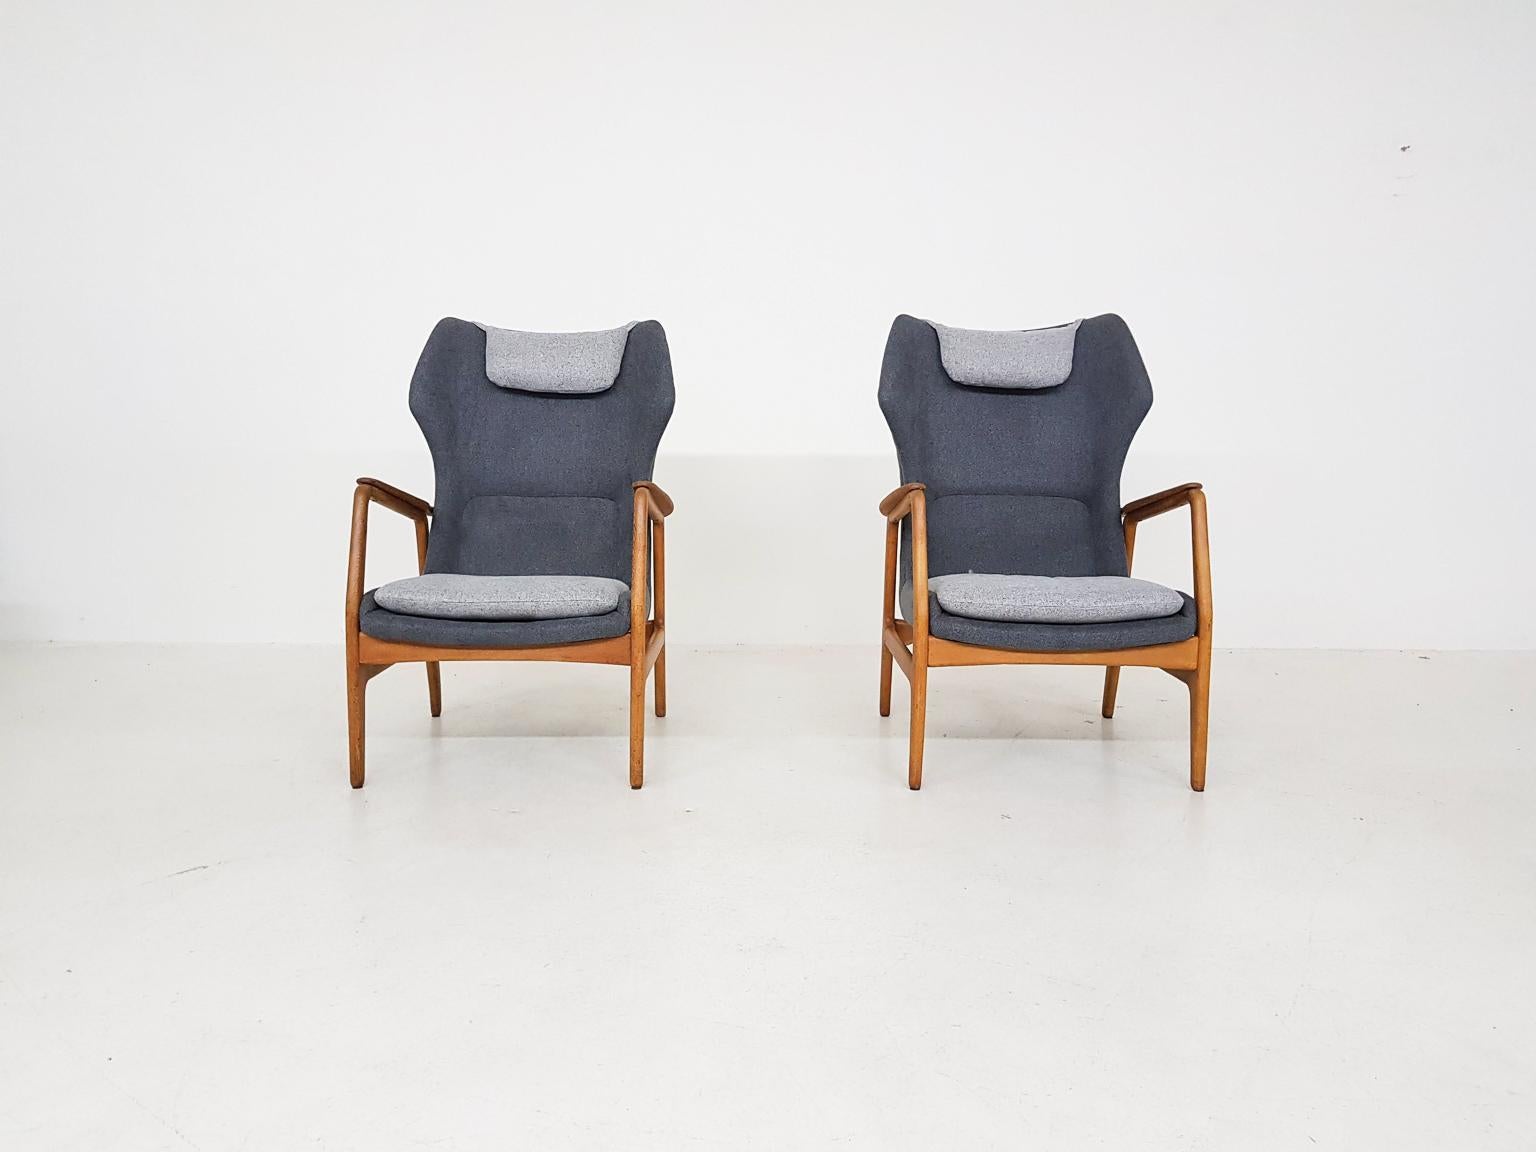 Stunning lounge or arm chair, model “Karen” by Aksel Bender Madsen for Bovenkamp, made in the Netherlands in the 1960s.

We have two chairs available! Price is per piece.

The chairs are made of wood and have new two-tone grey upholstery. They are